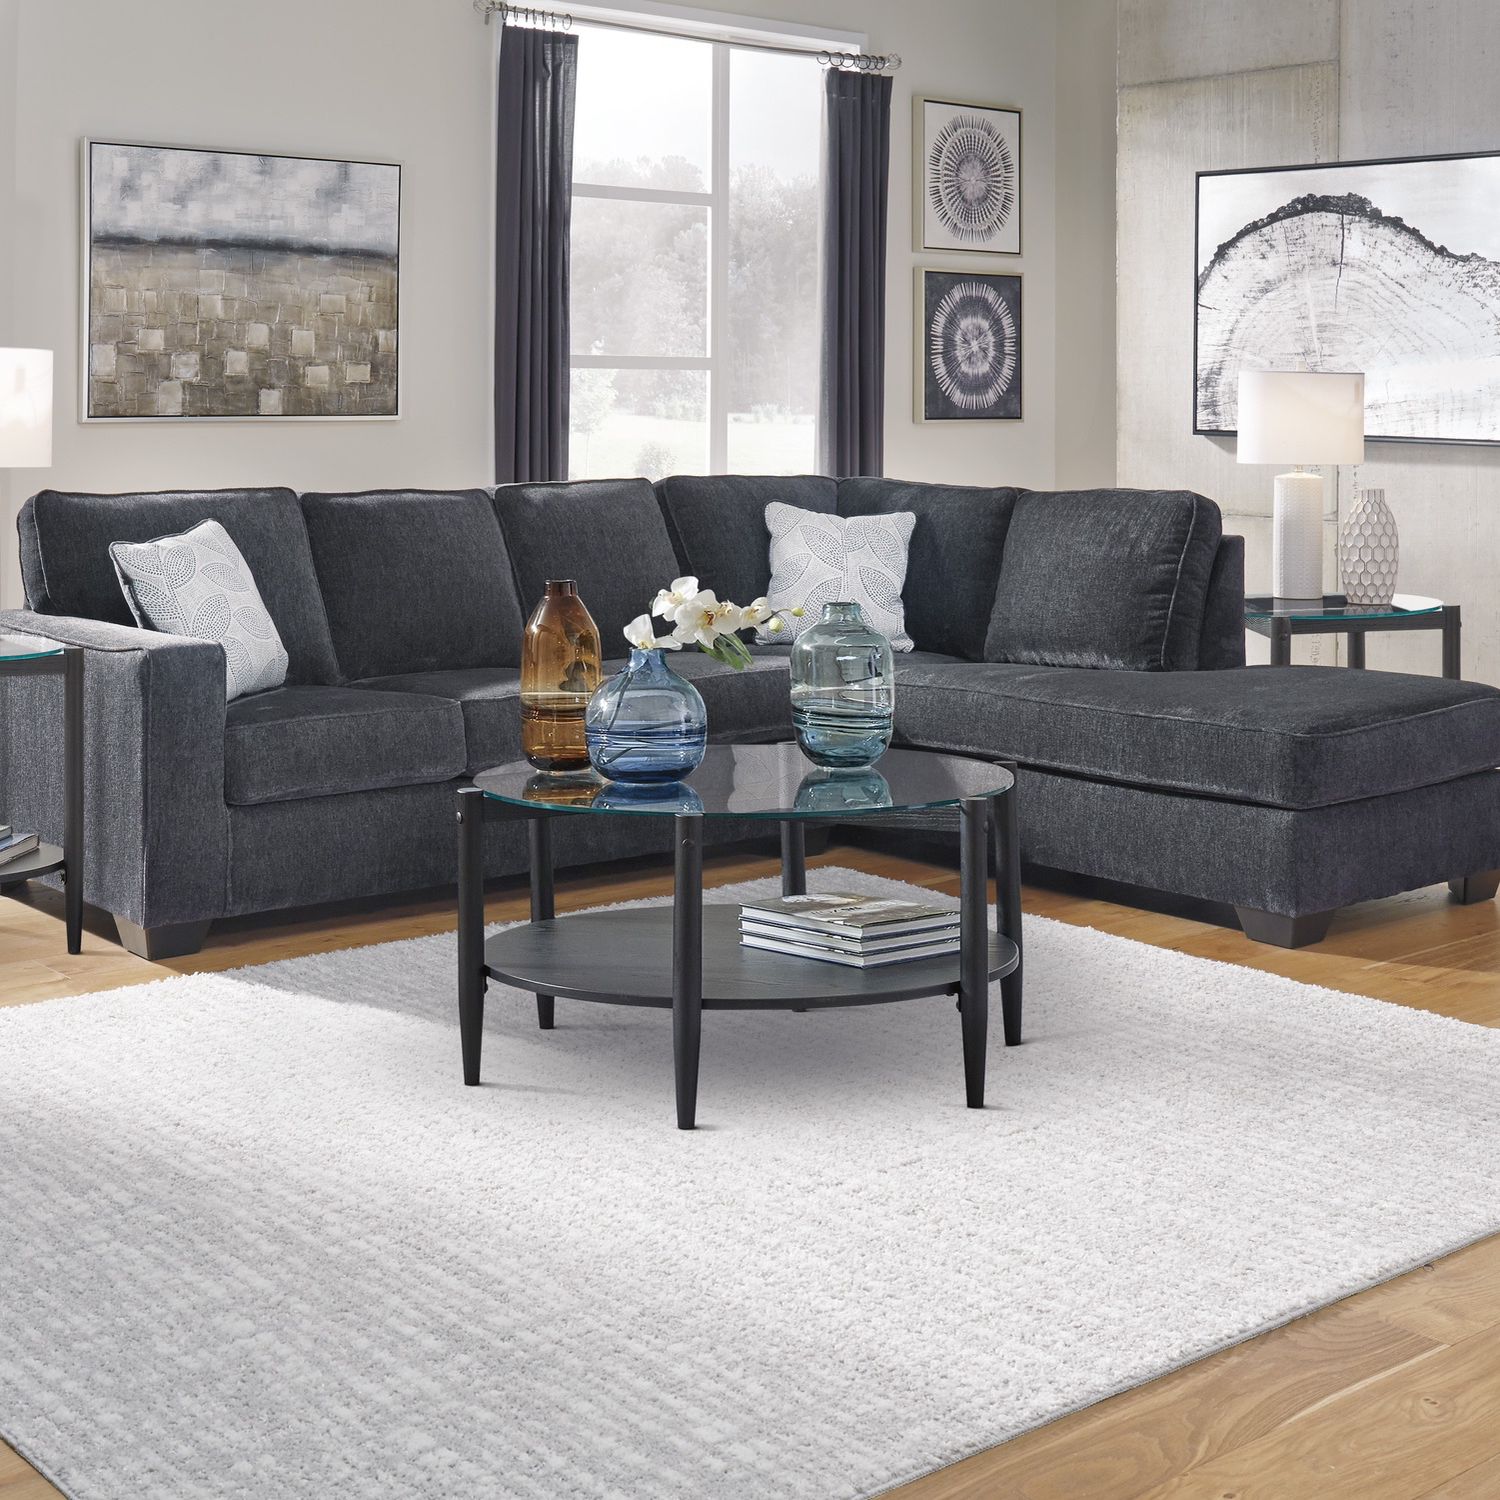 2 Piece Sectional In Slate Or Alloy Grey